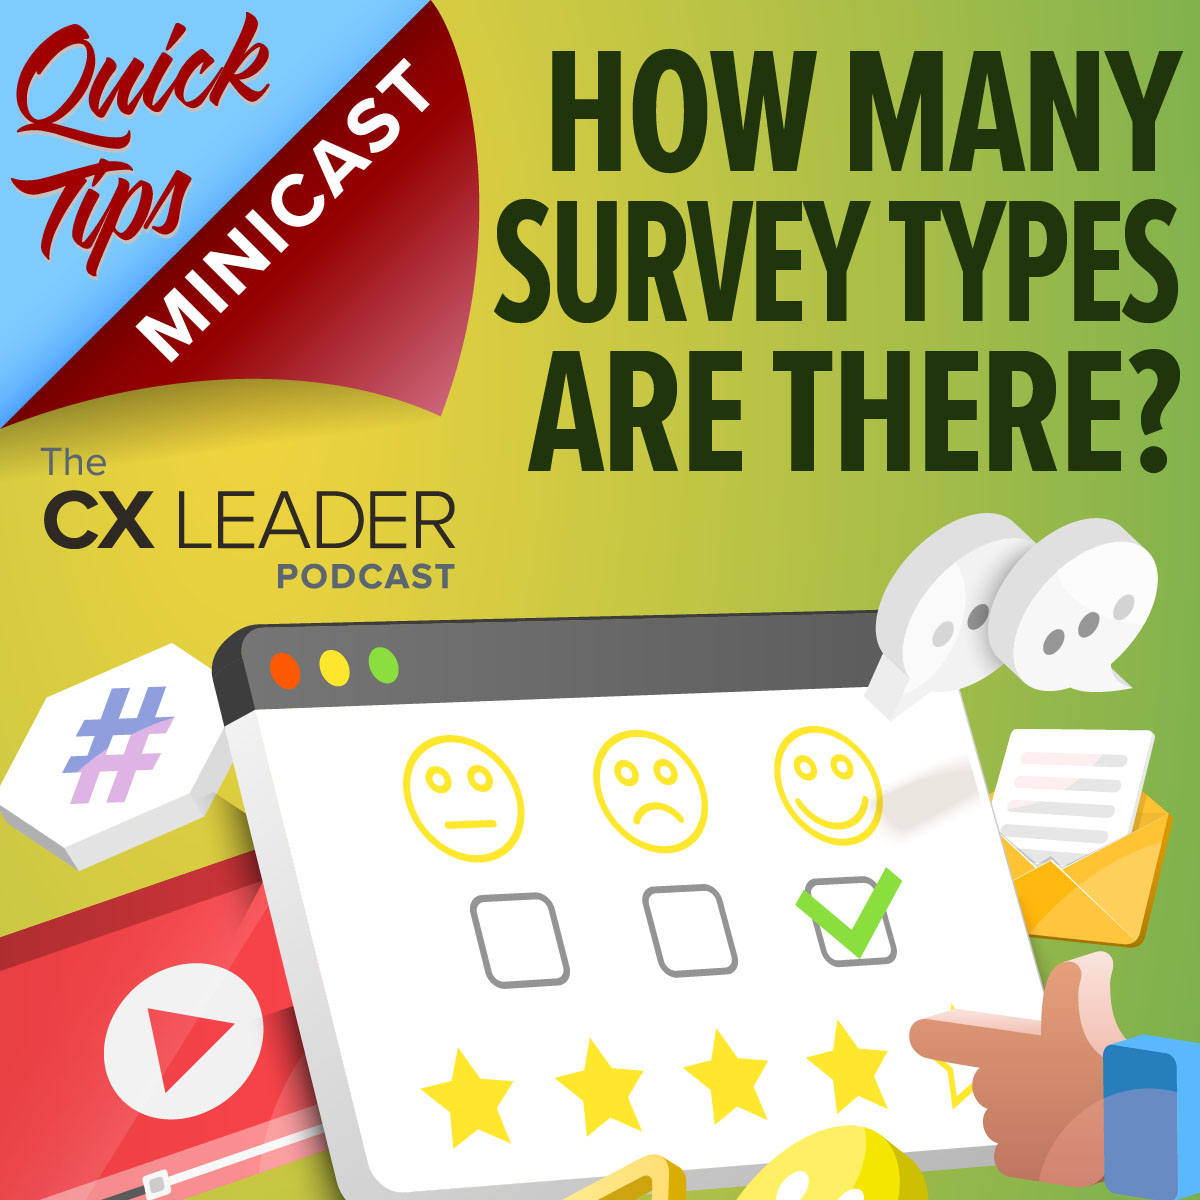 Quick Tips Minicast: How many survey types are there?